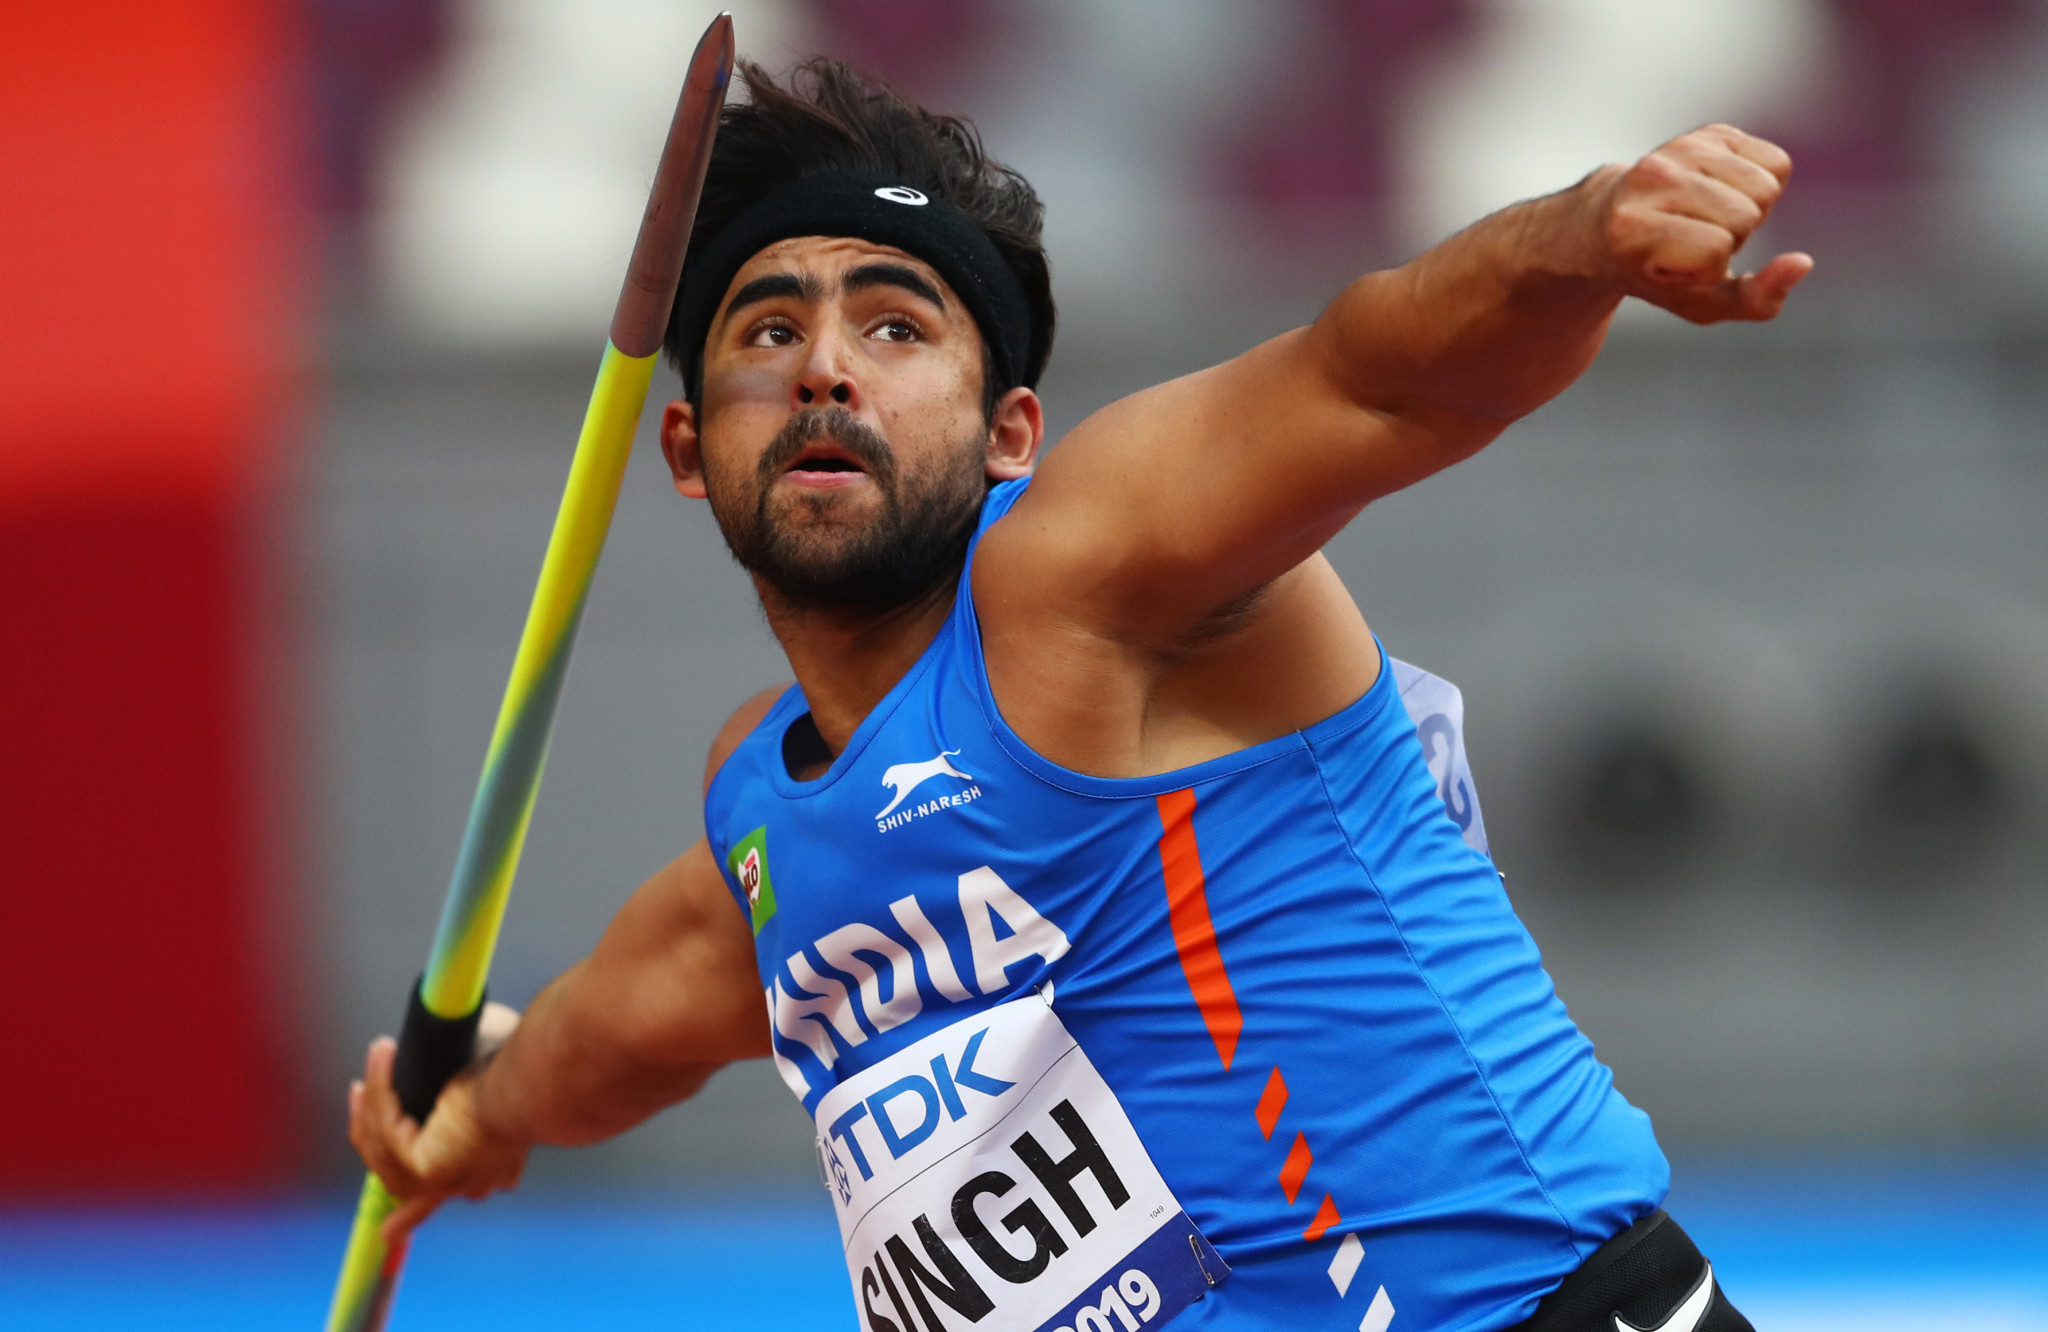 Shivpal Singh is set for his first Olympic Games ©Getty Images